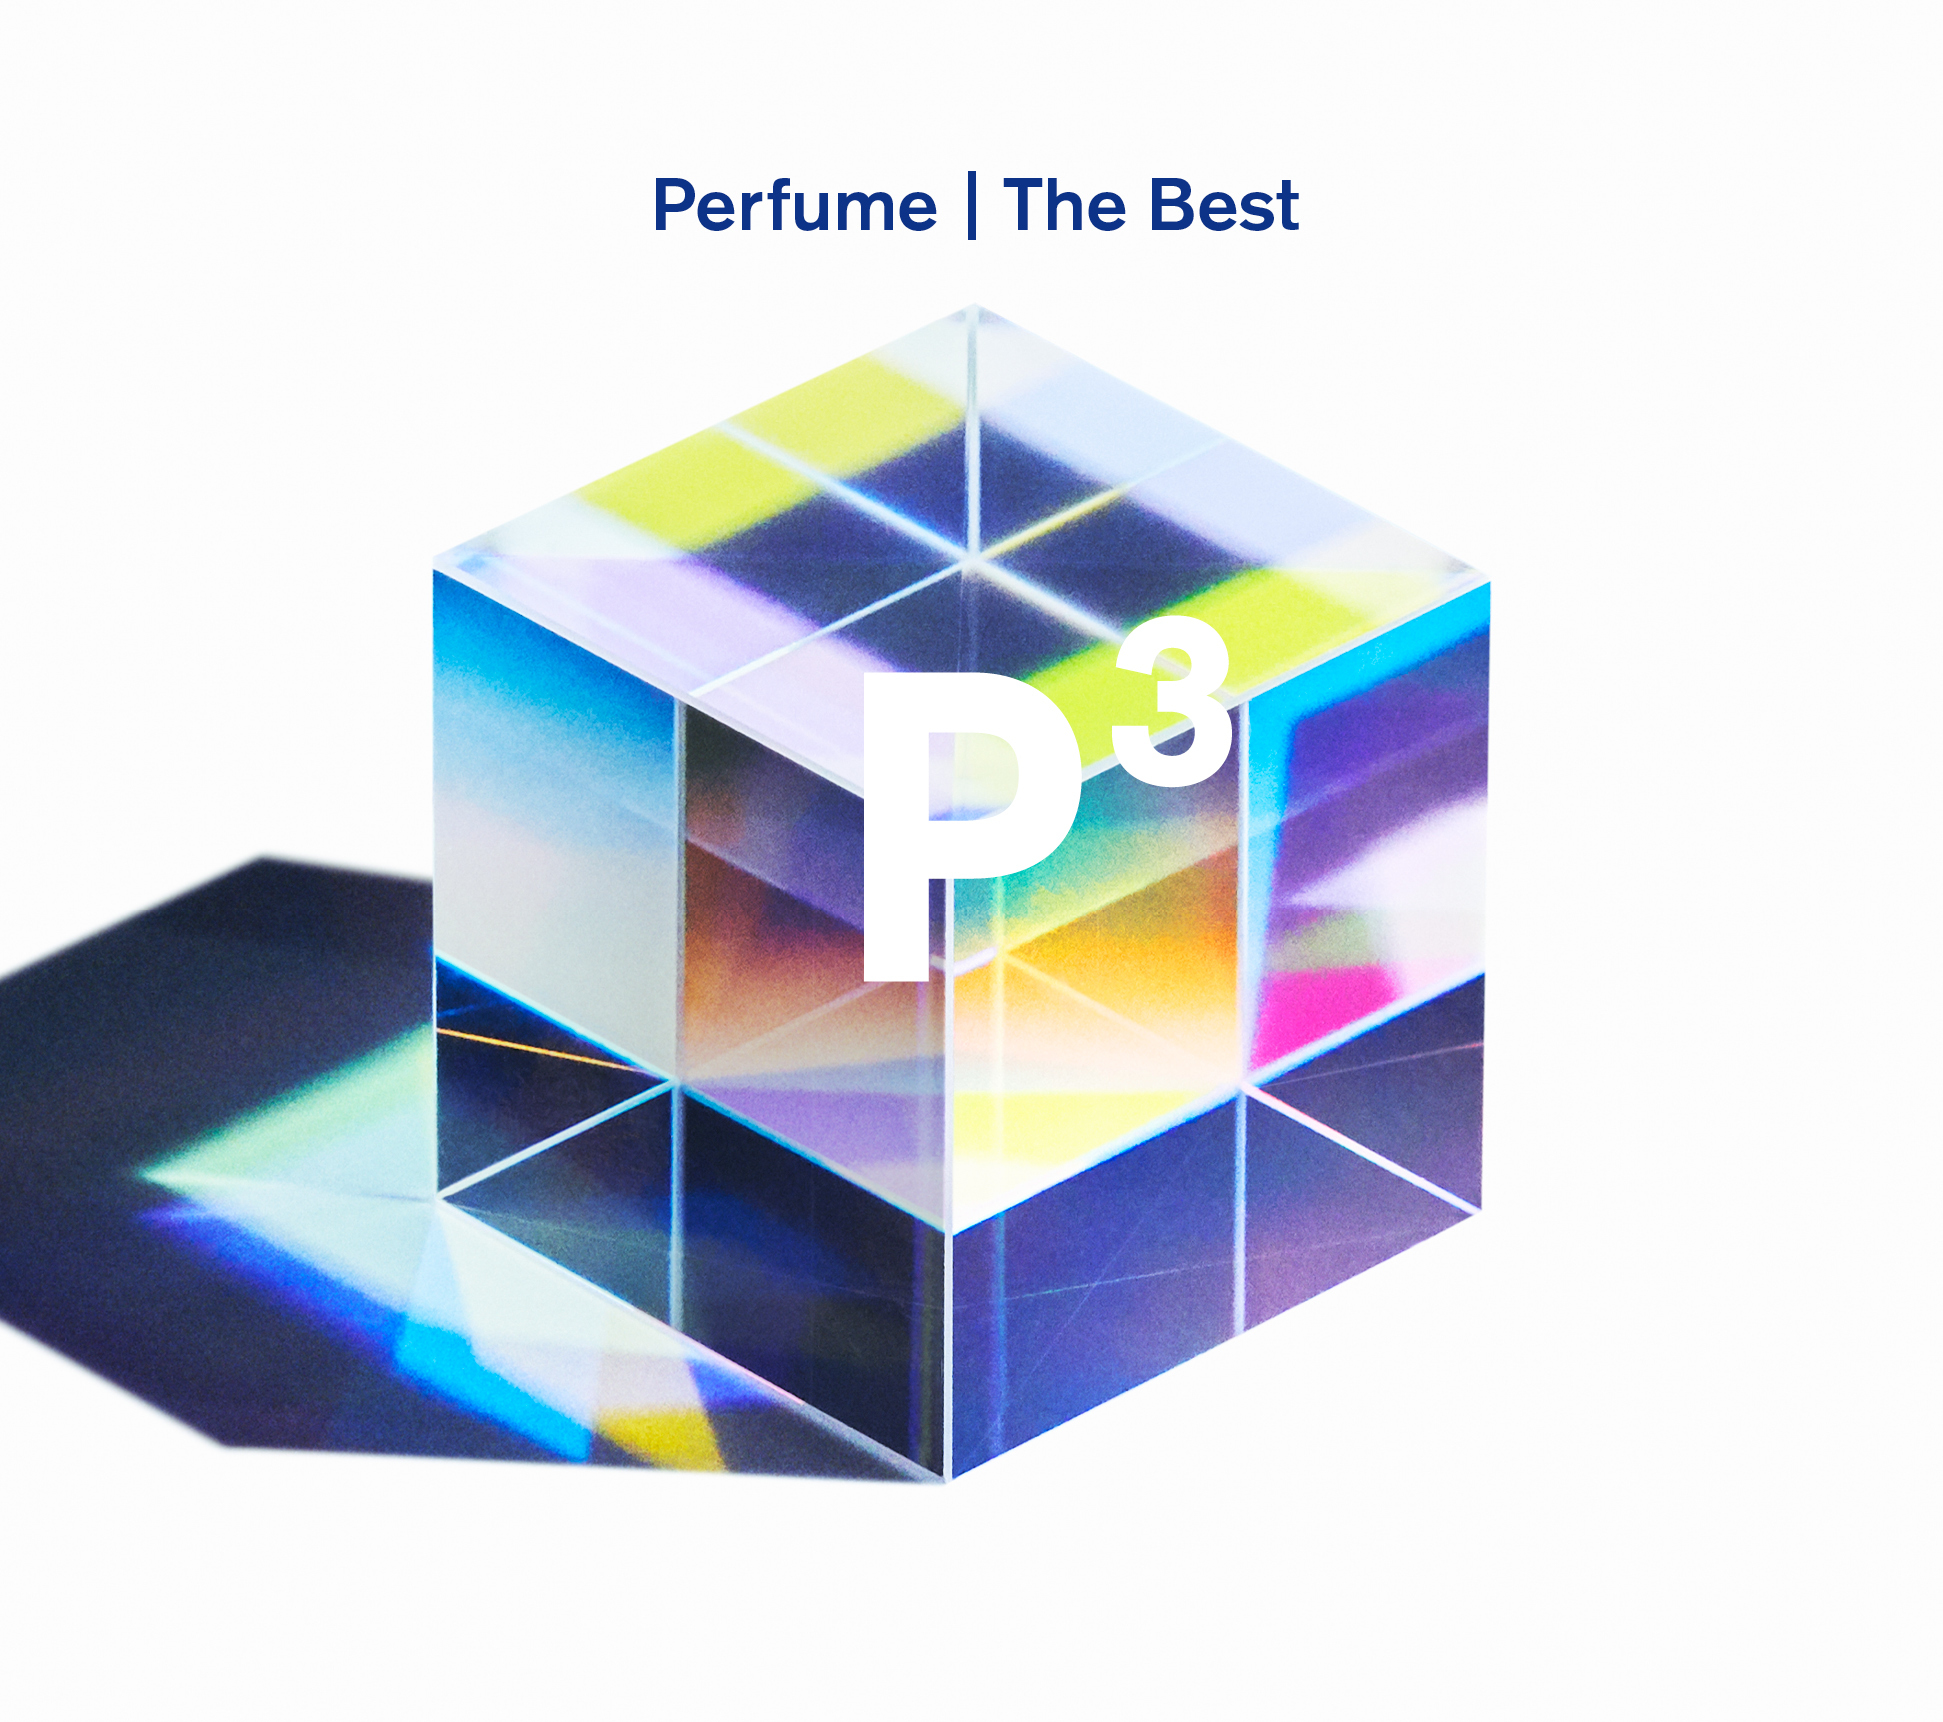 『Perfume The Best "P Cubed"』初回盤